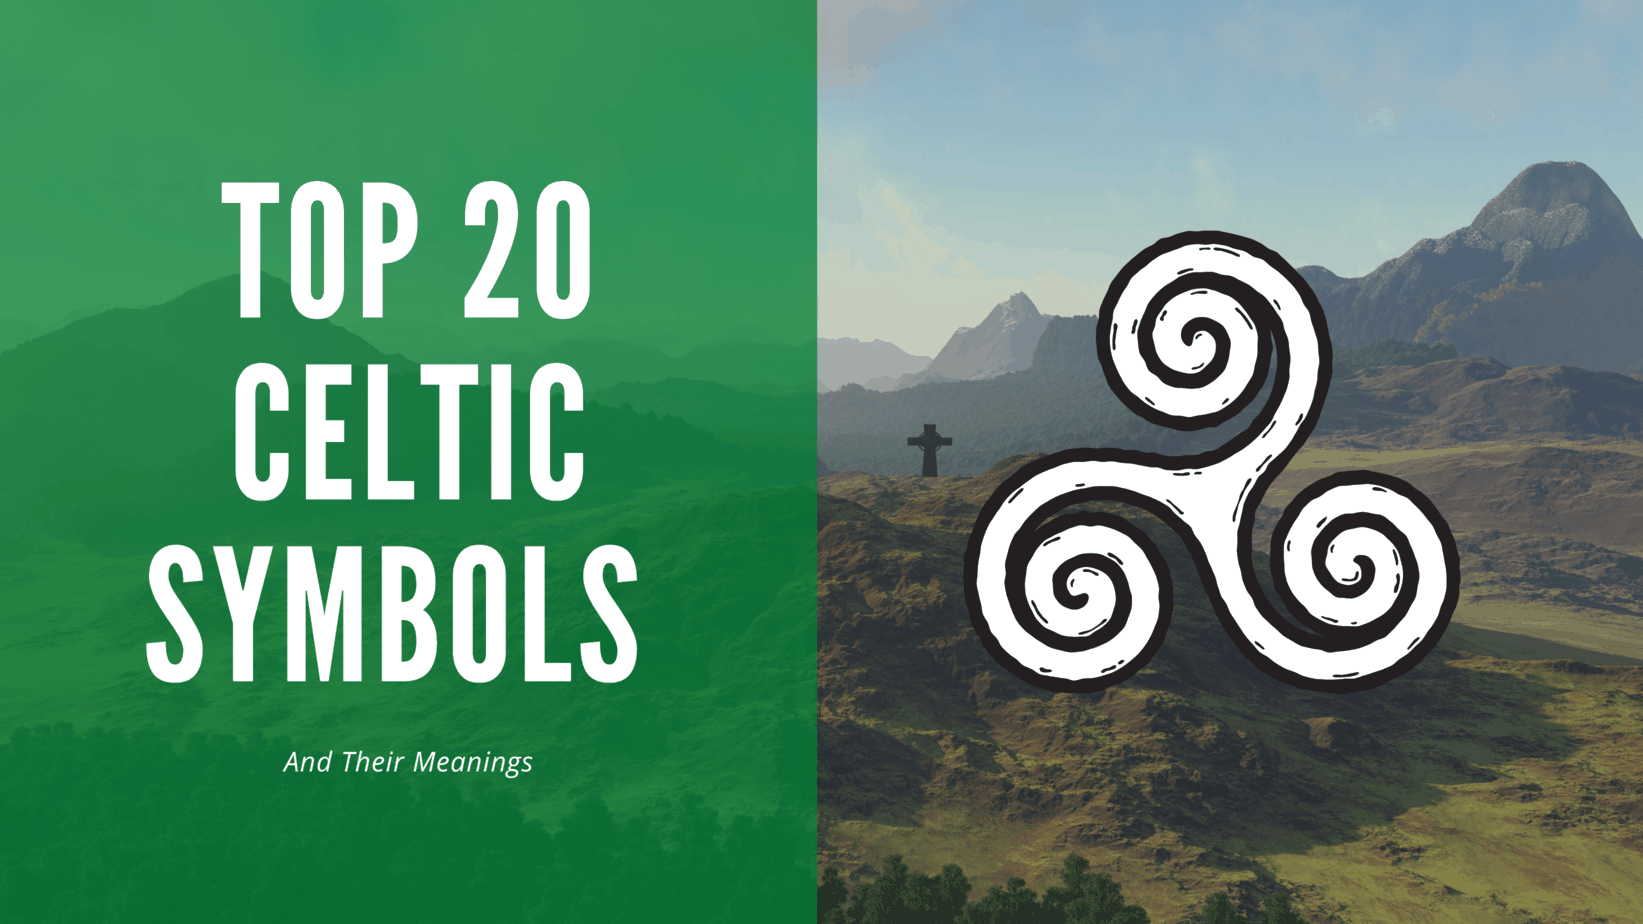 Top 20 Celtic Symbols And Their Meanings